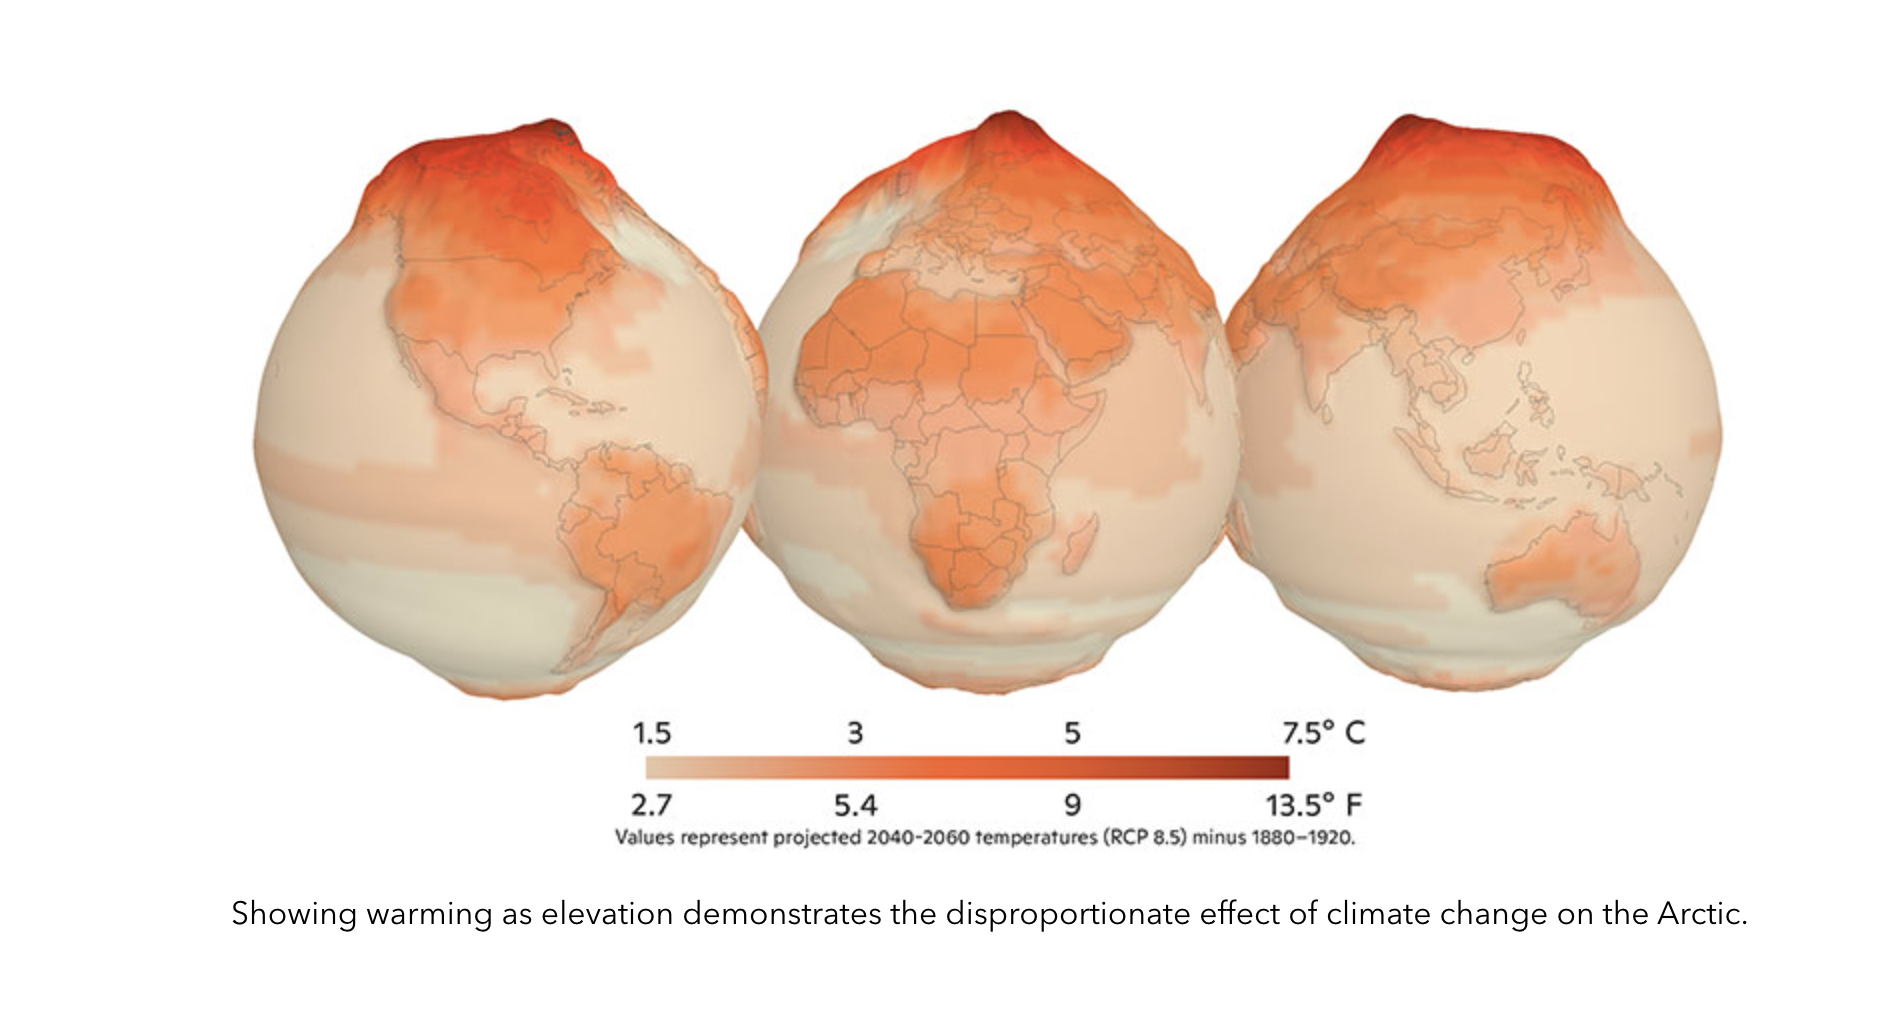 three orange and tan globes that are ovals instead of circles to show disproportionate warming in the Arctic